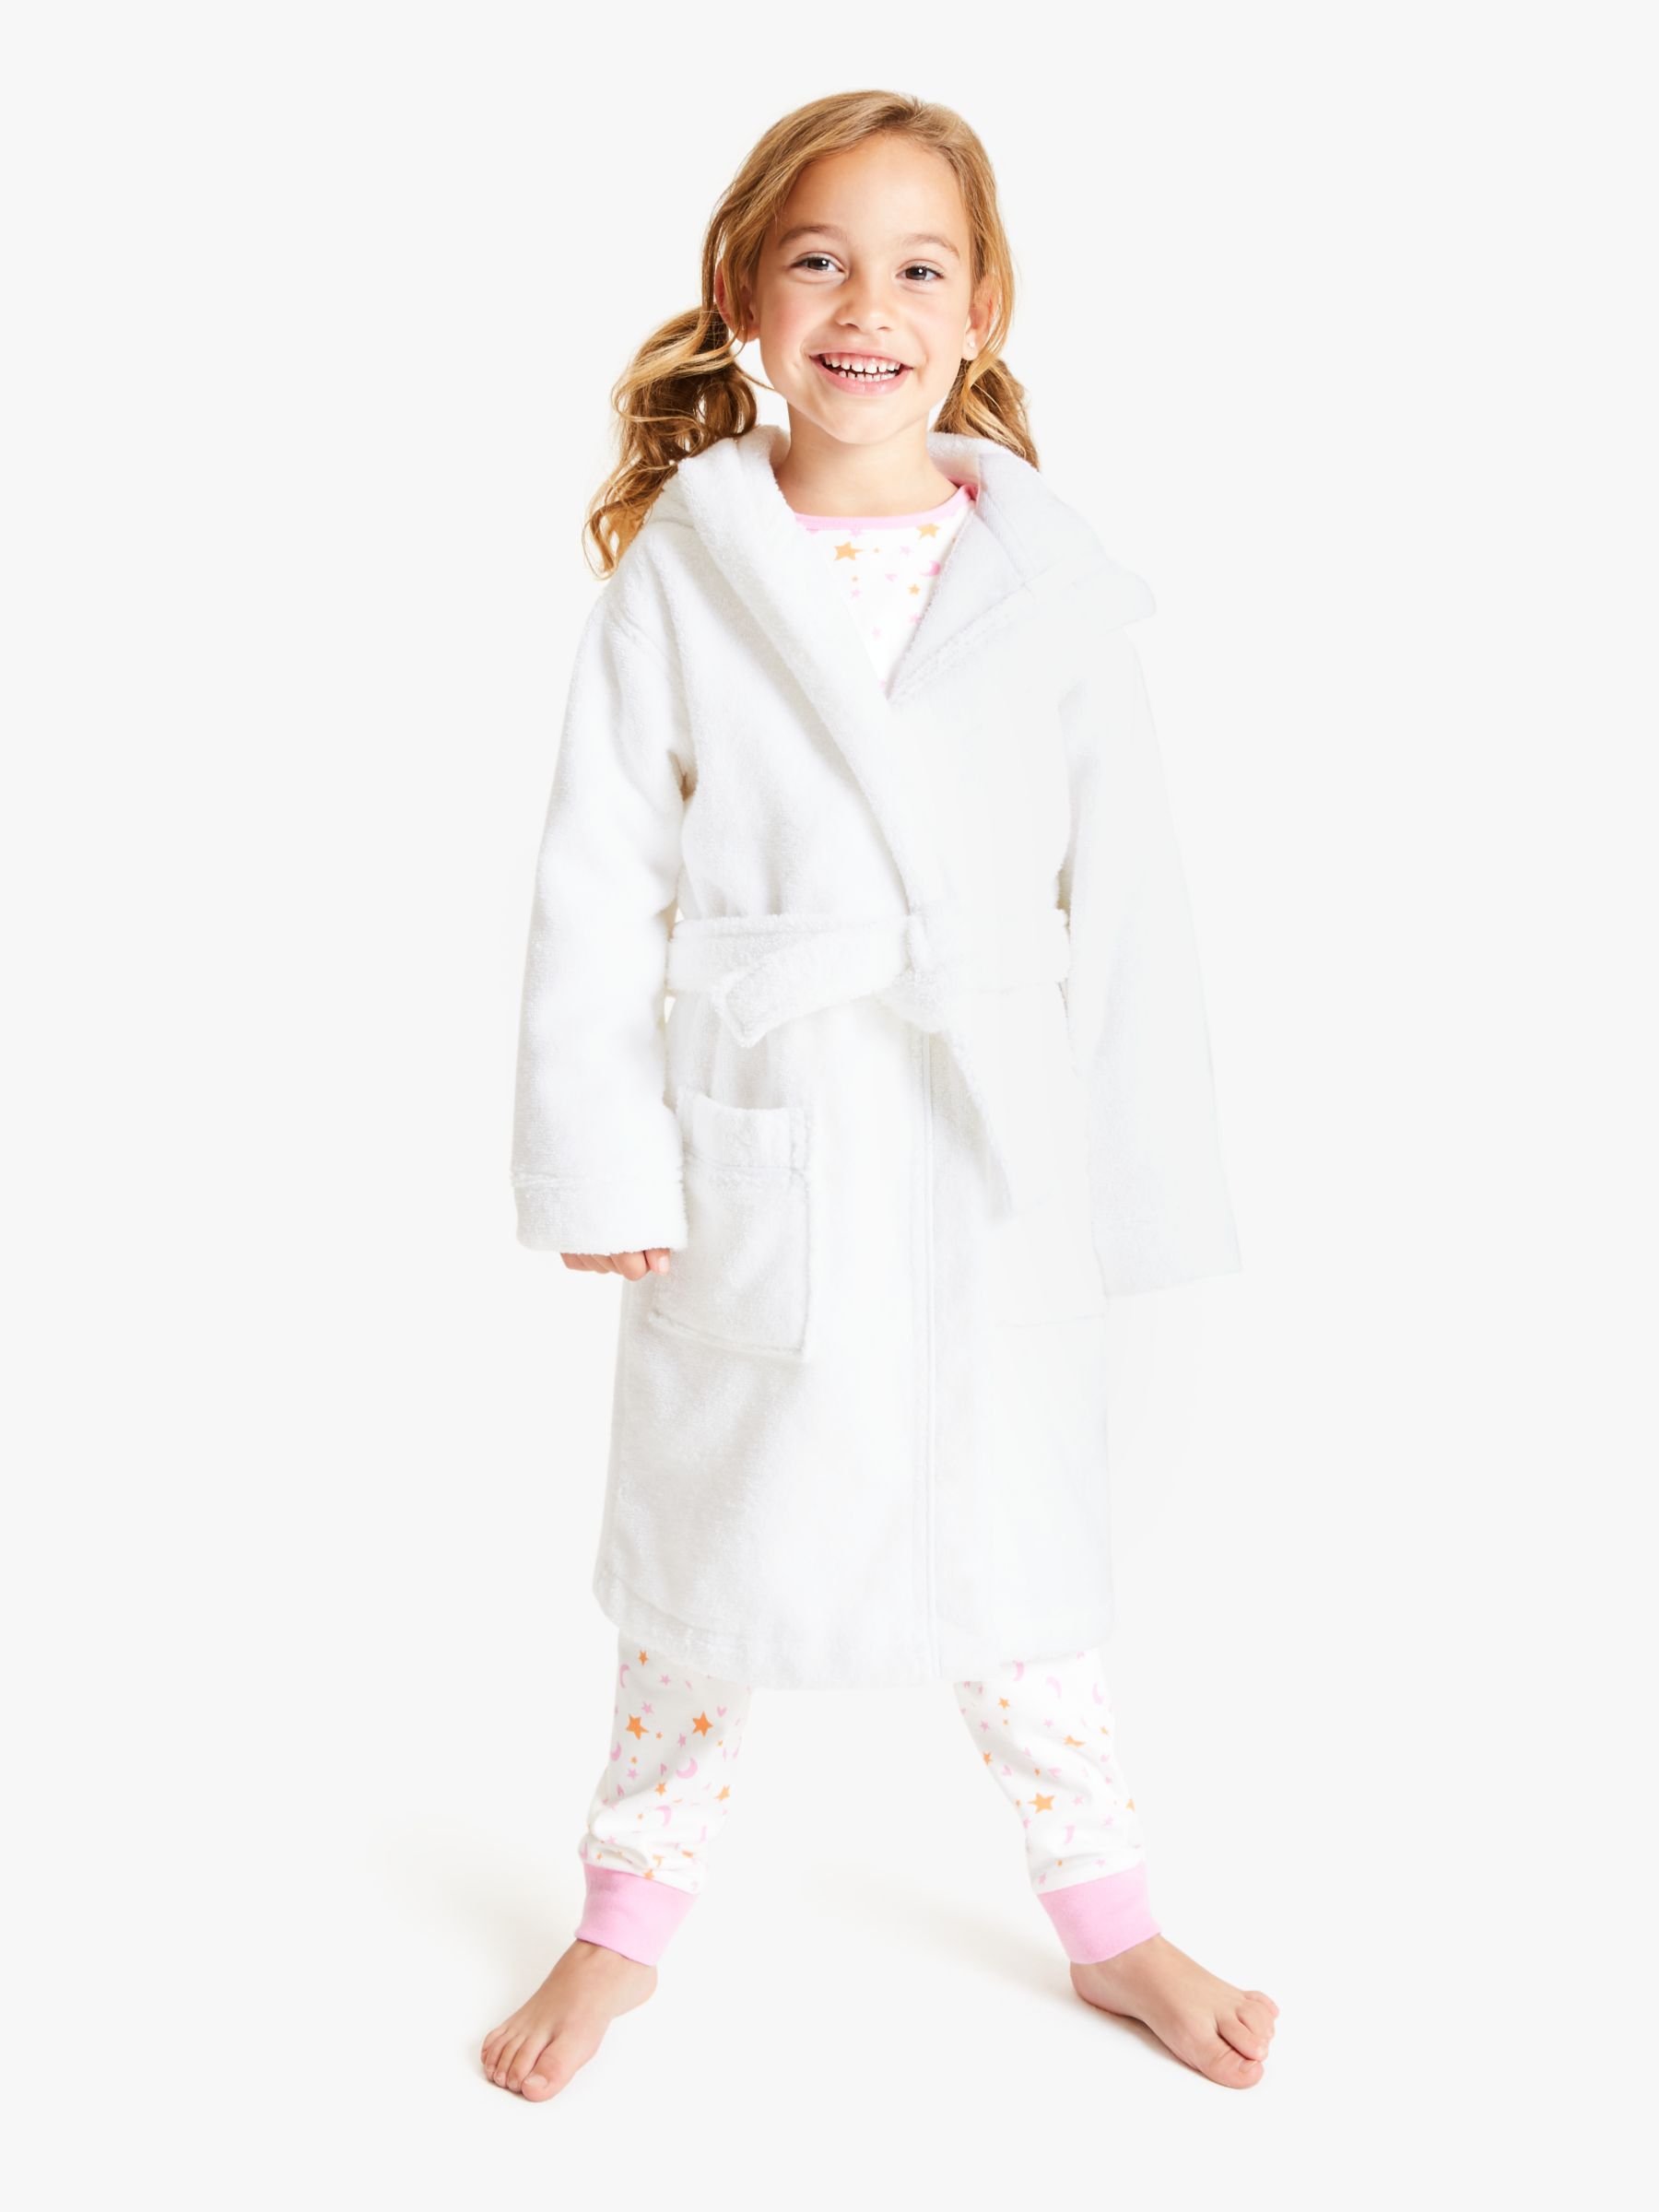 Girls Friends Hooded Robe Dressing Gown Ages 10-16 Years White